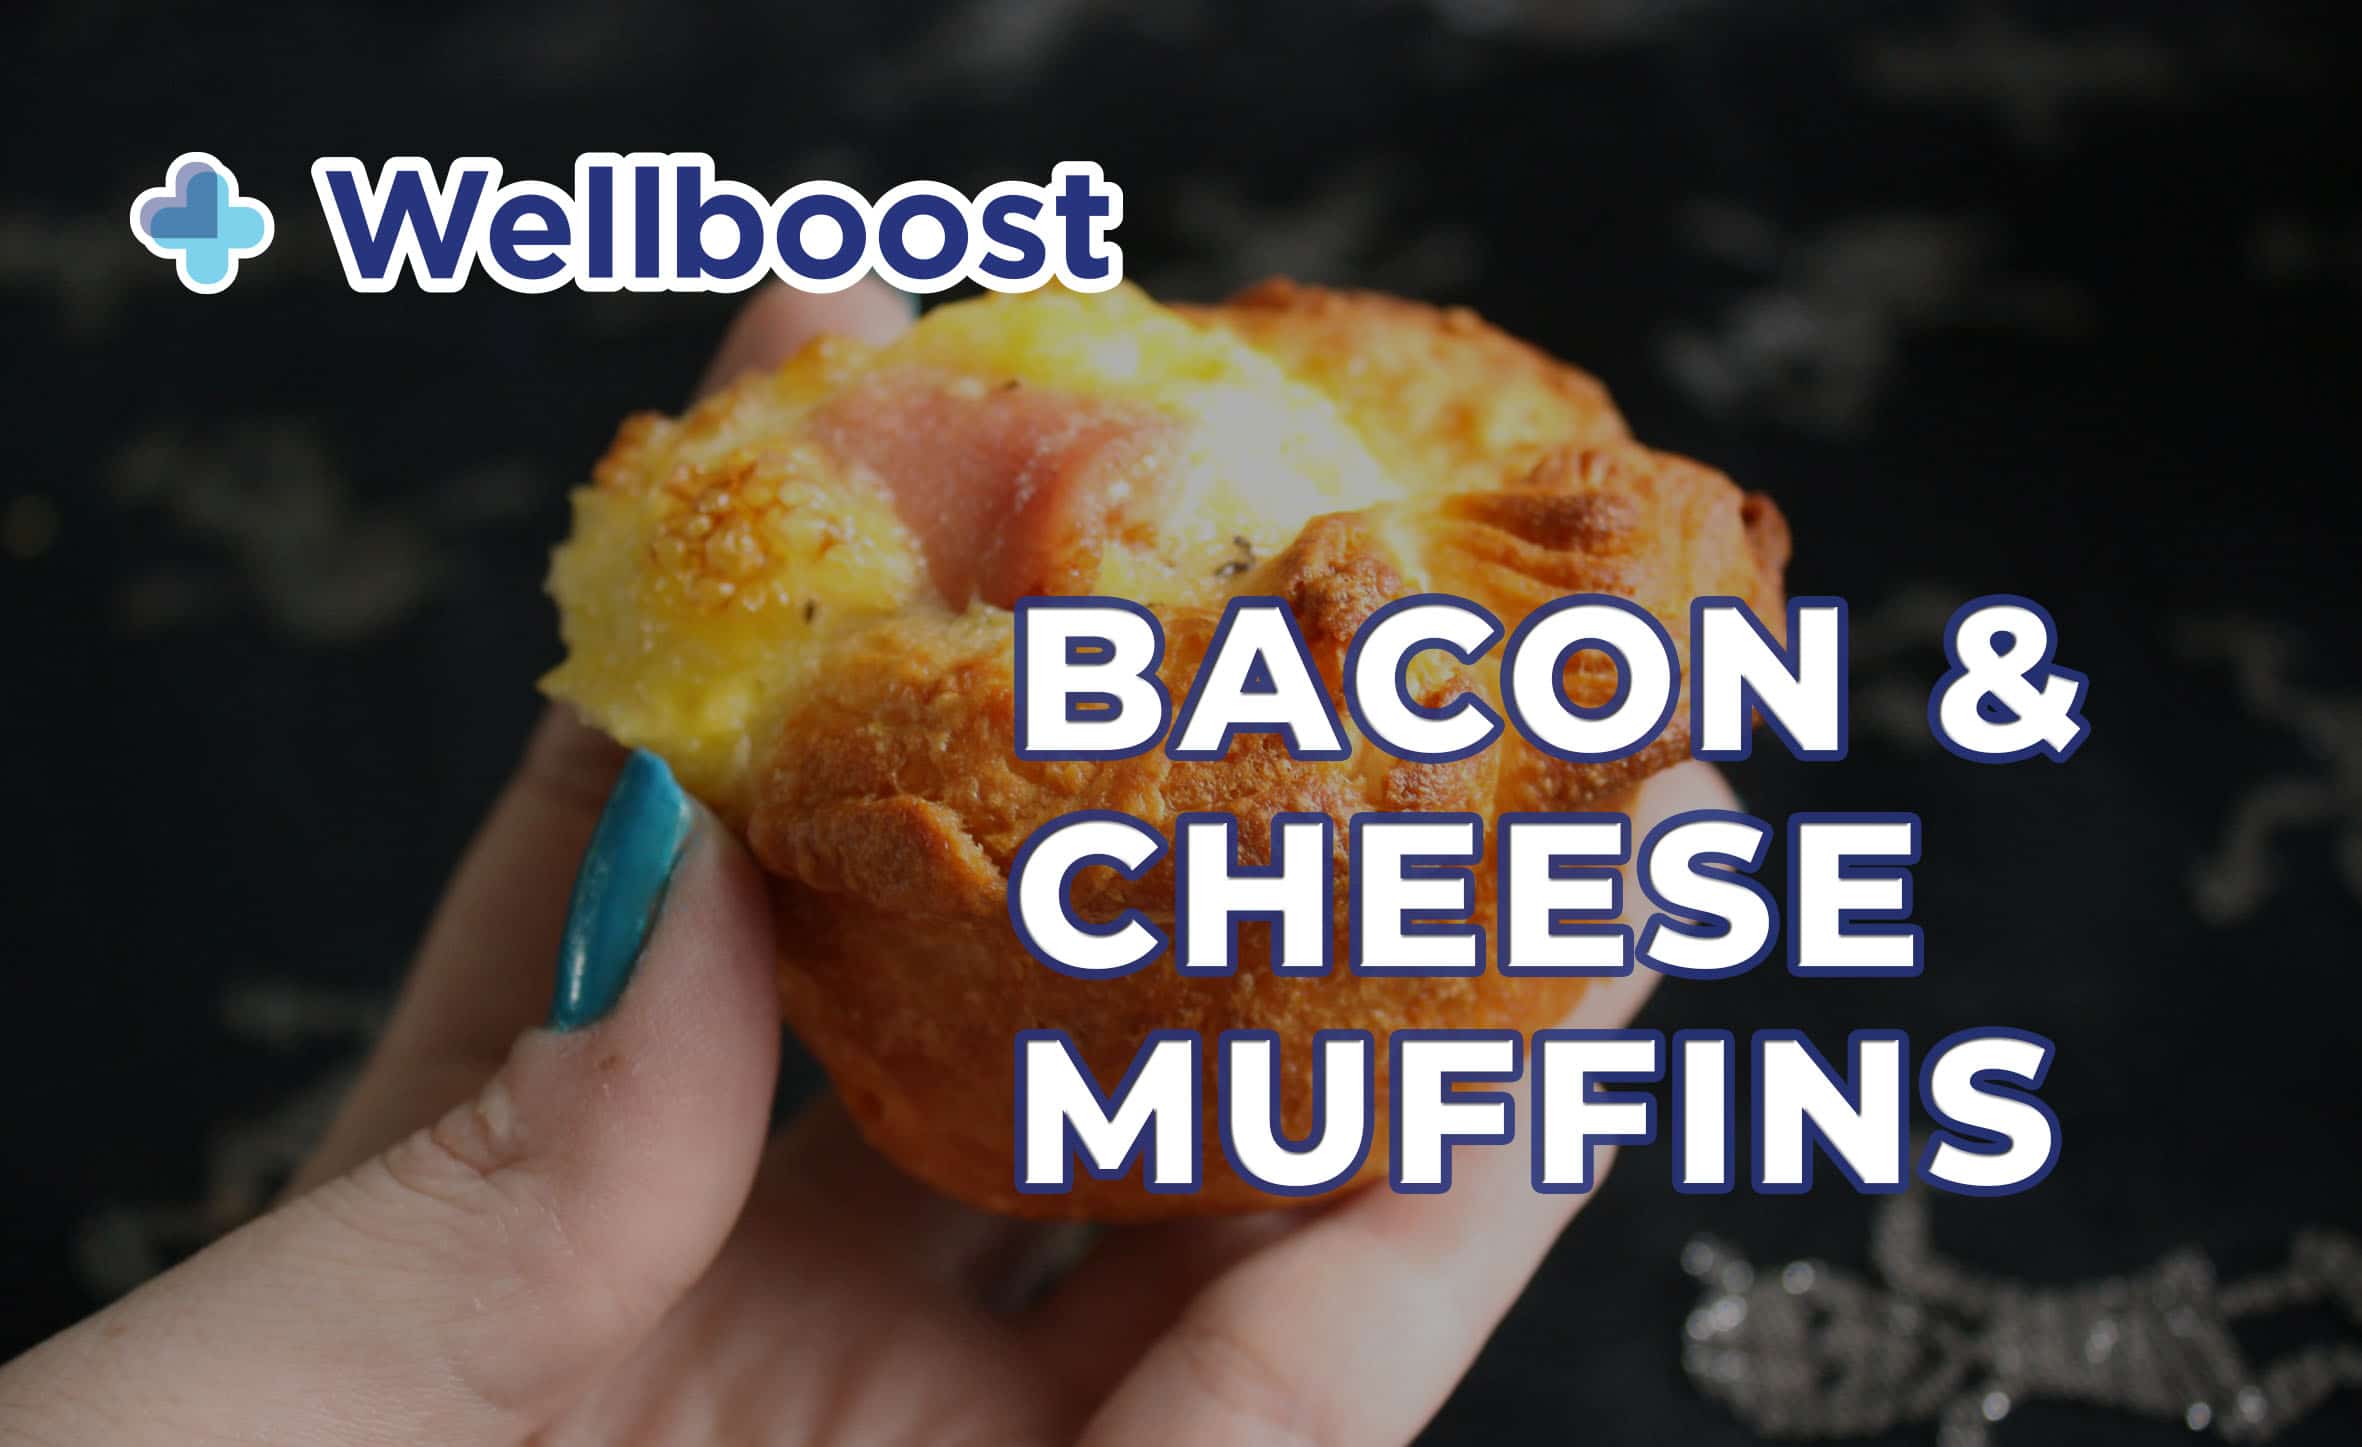 WELLBOOST BACON & CHEESE MUFFINS